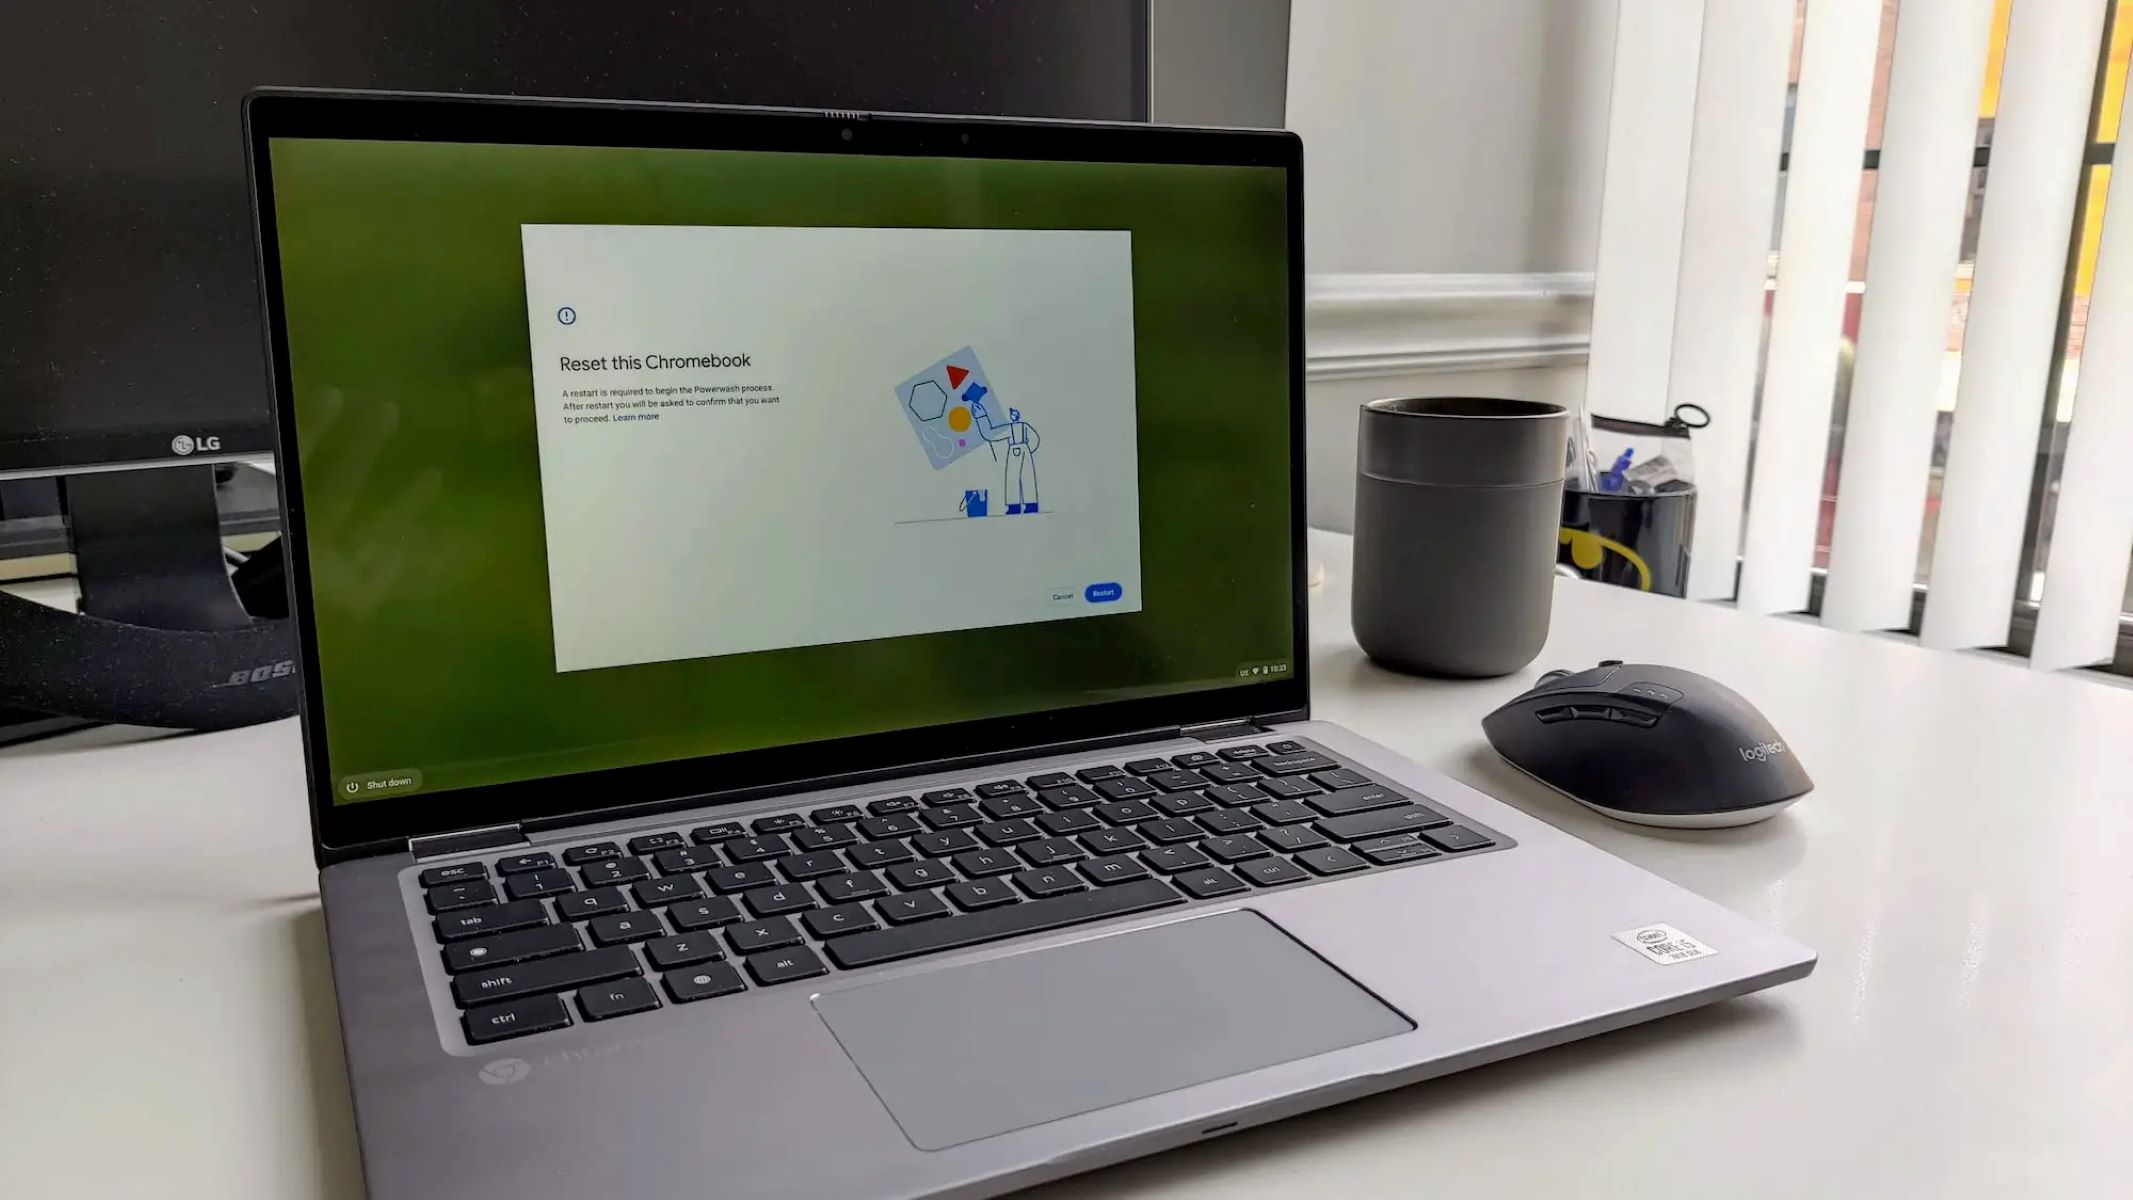 How To Do A Hard Reset On A Chromebook